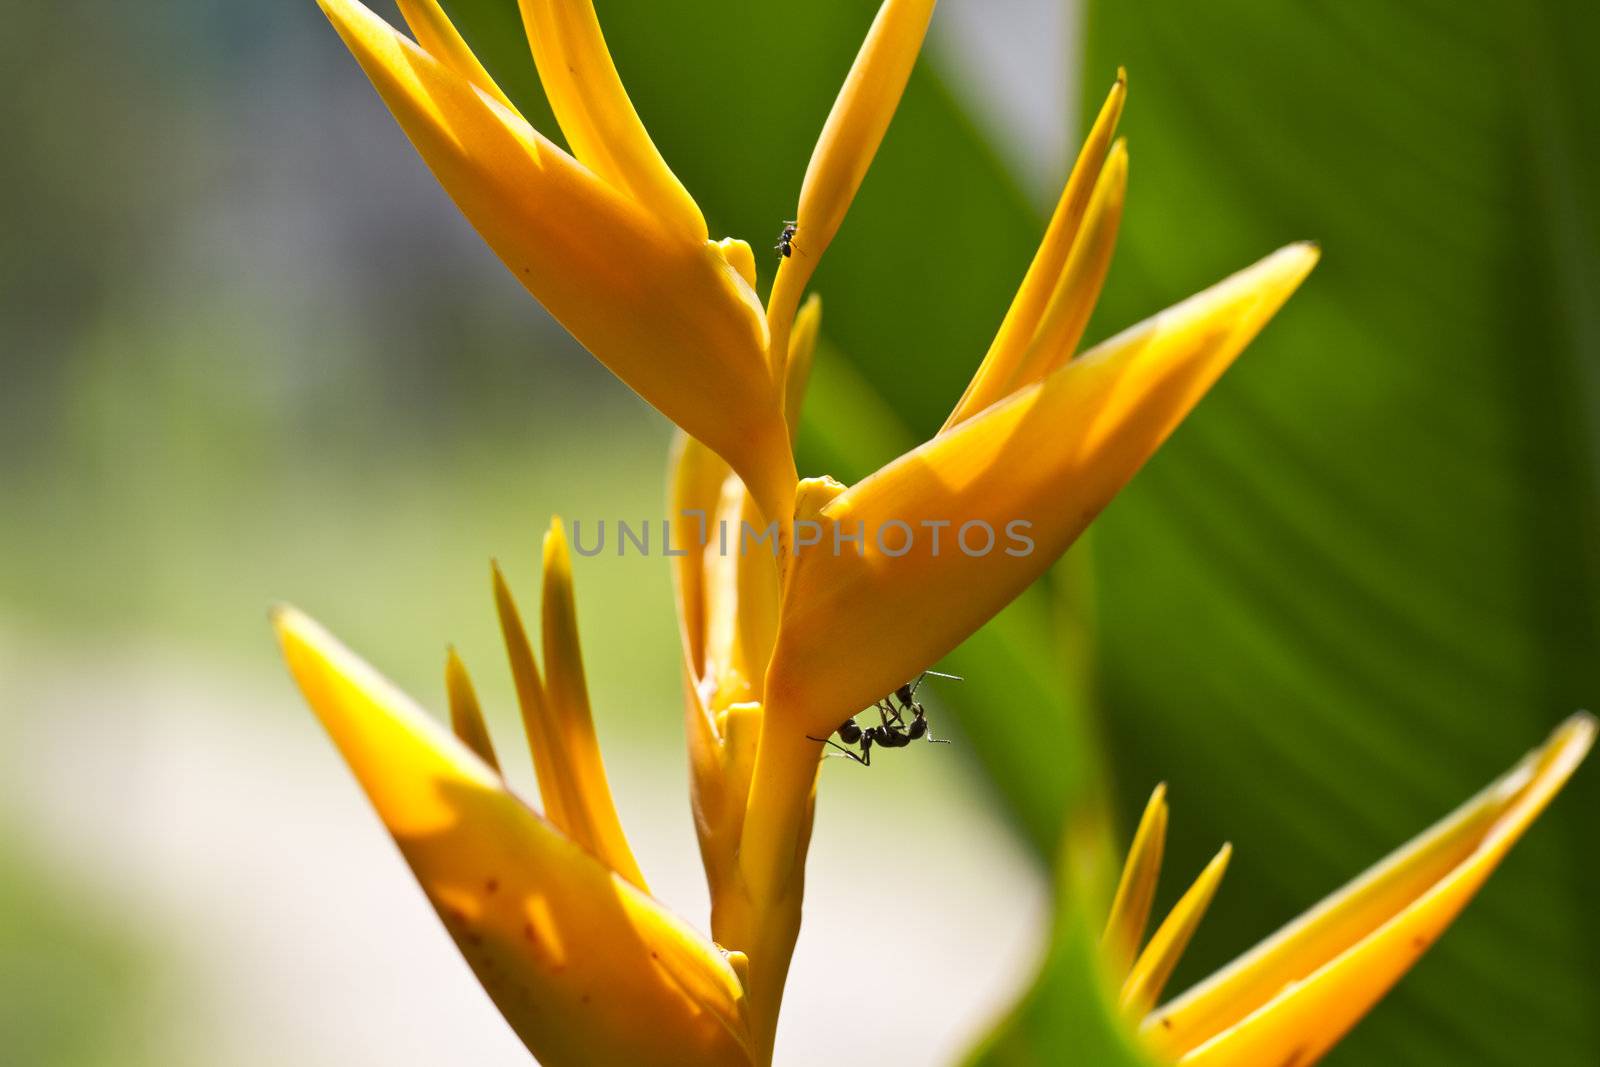  Ants on Heliconia by azamshah72